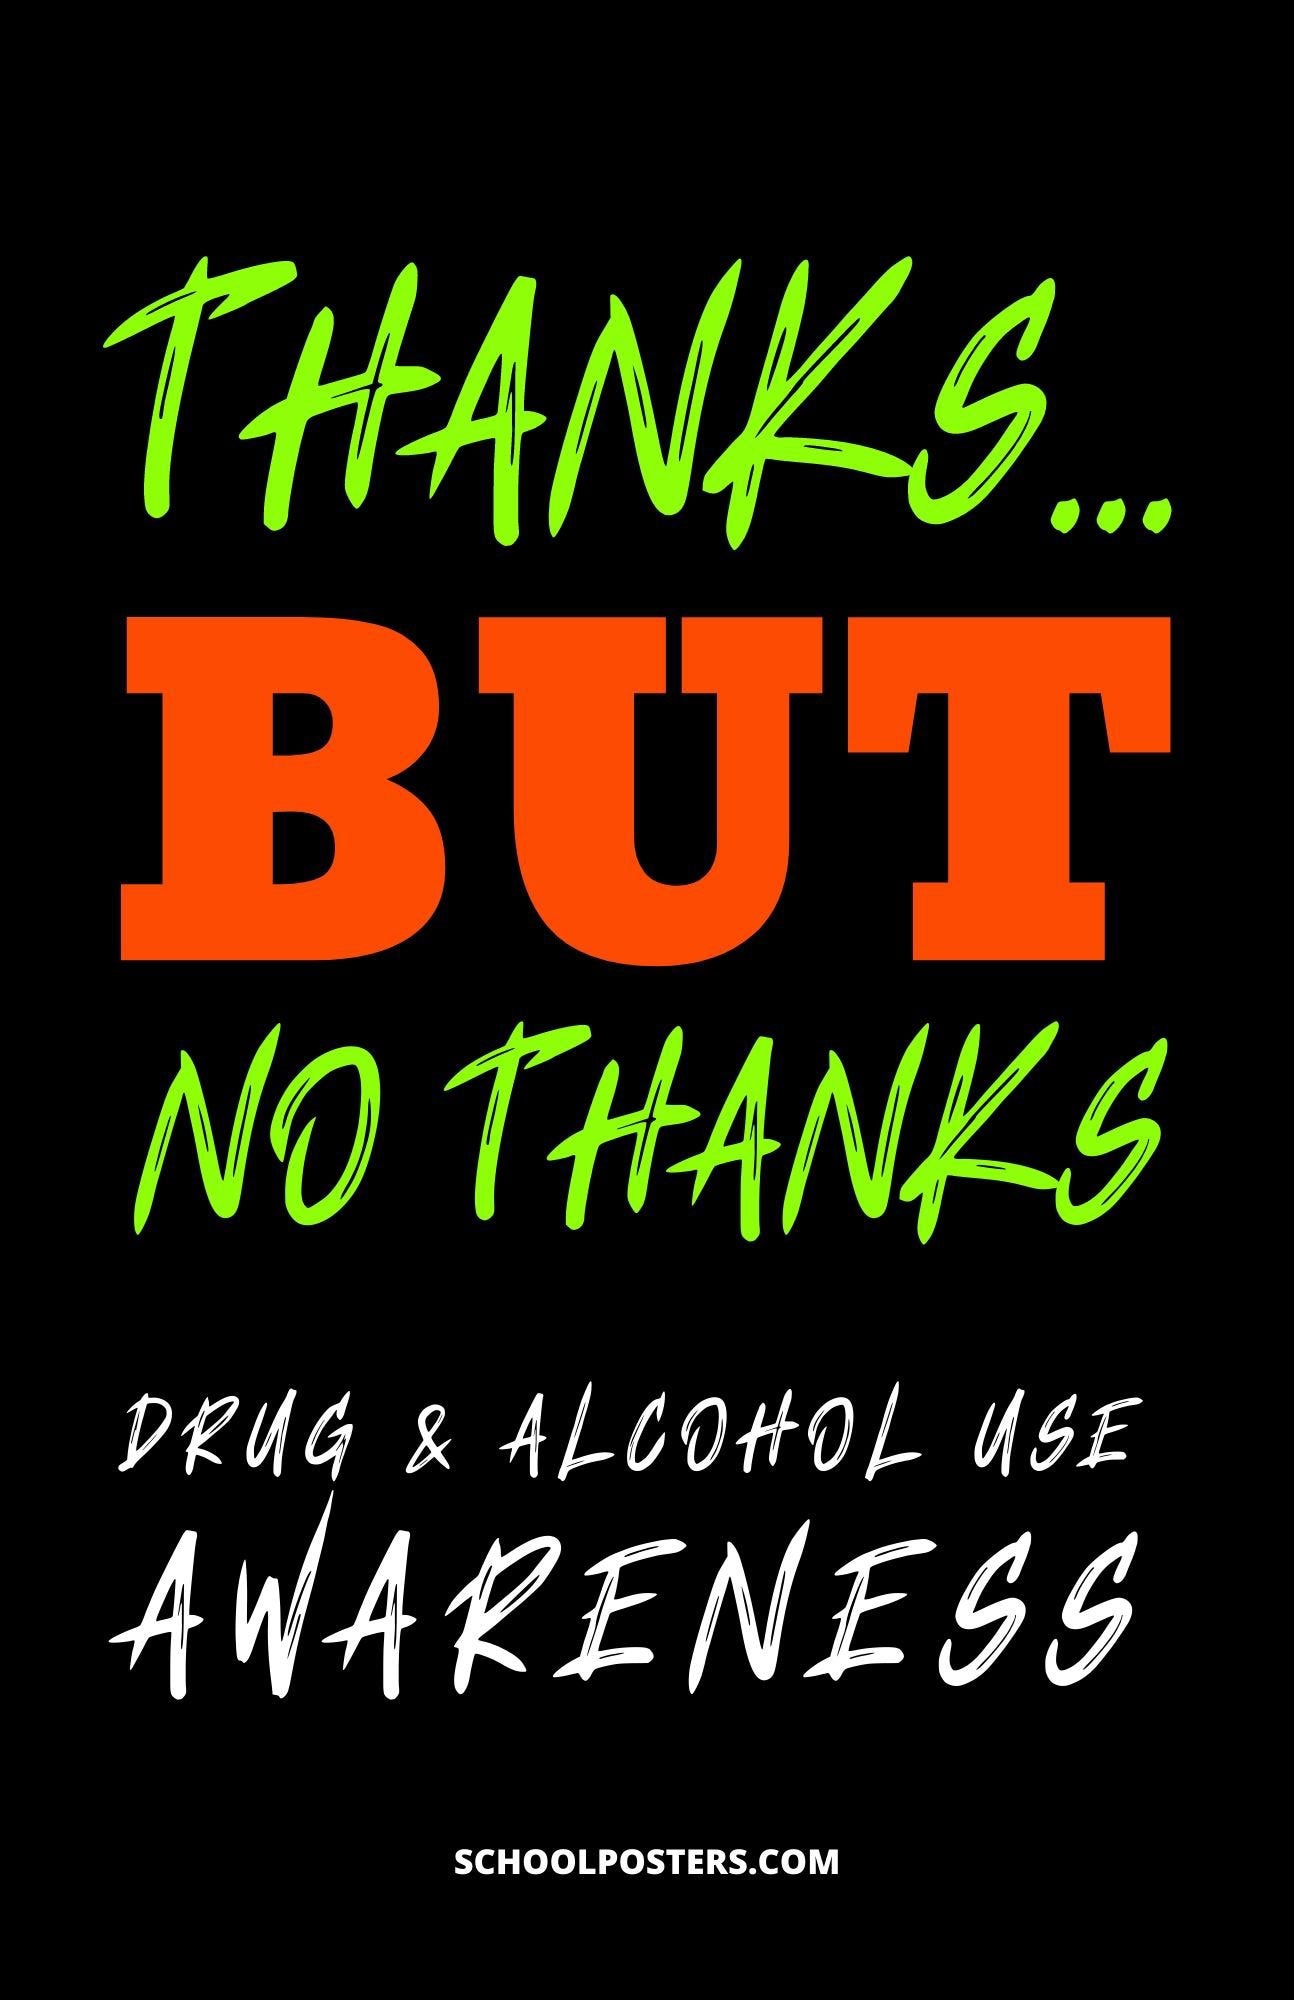 Drug and Alcohol Use Awareness Poster